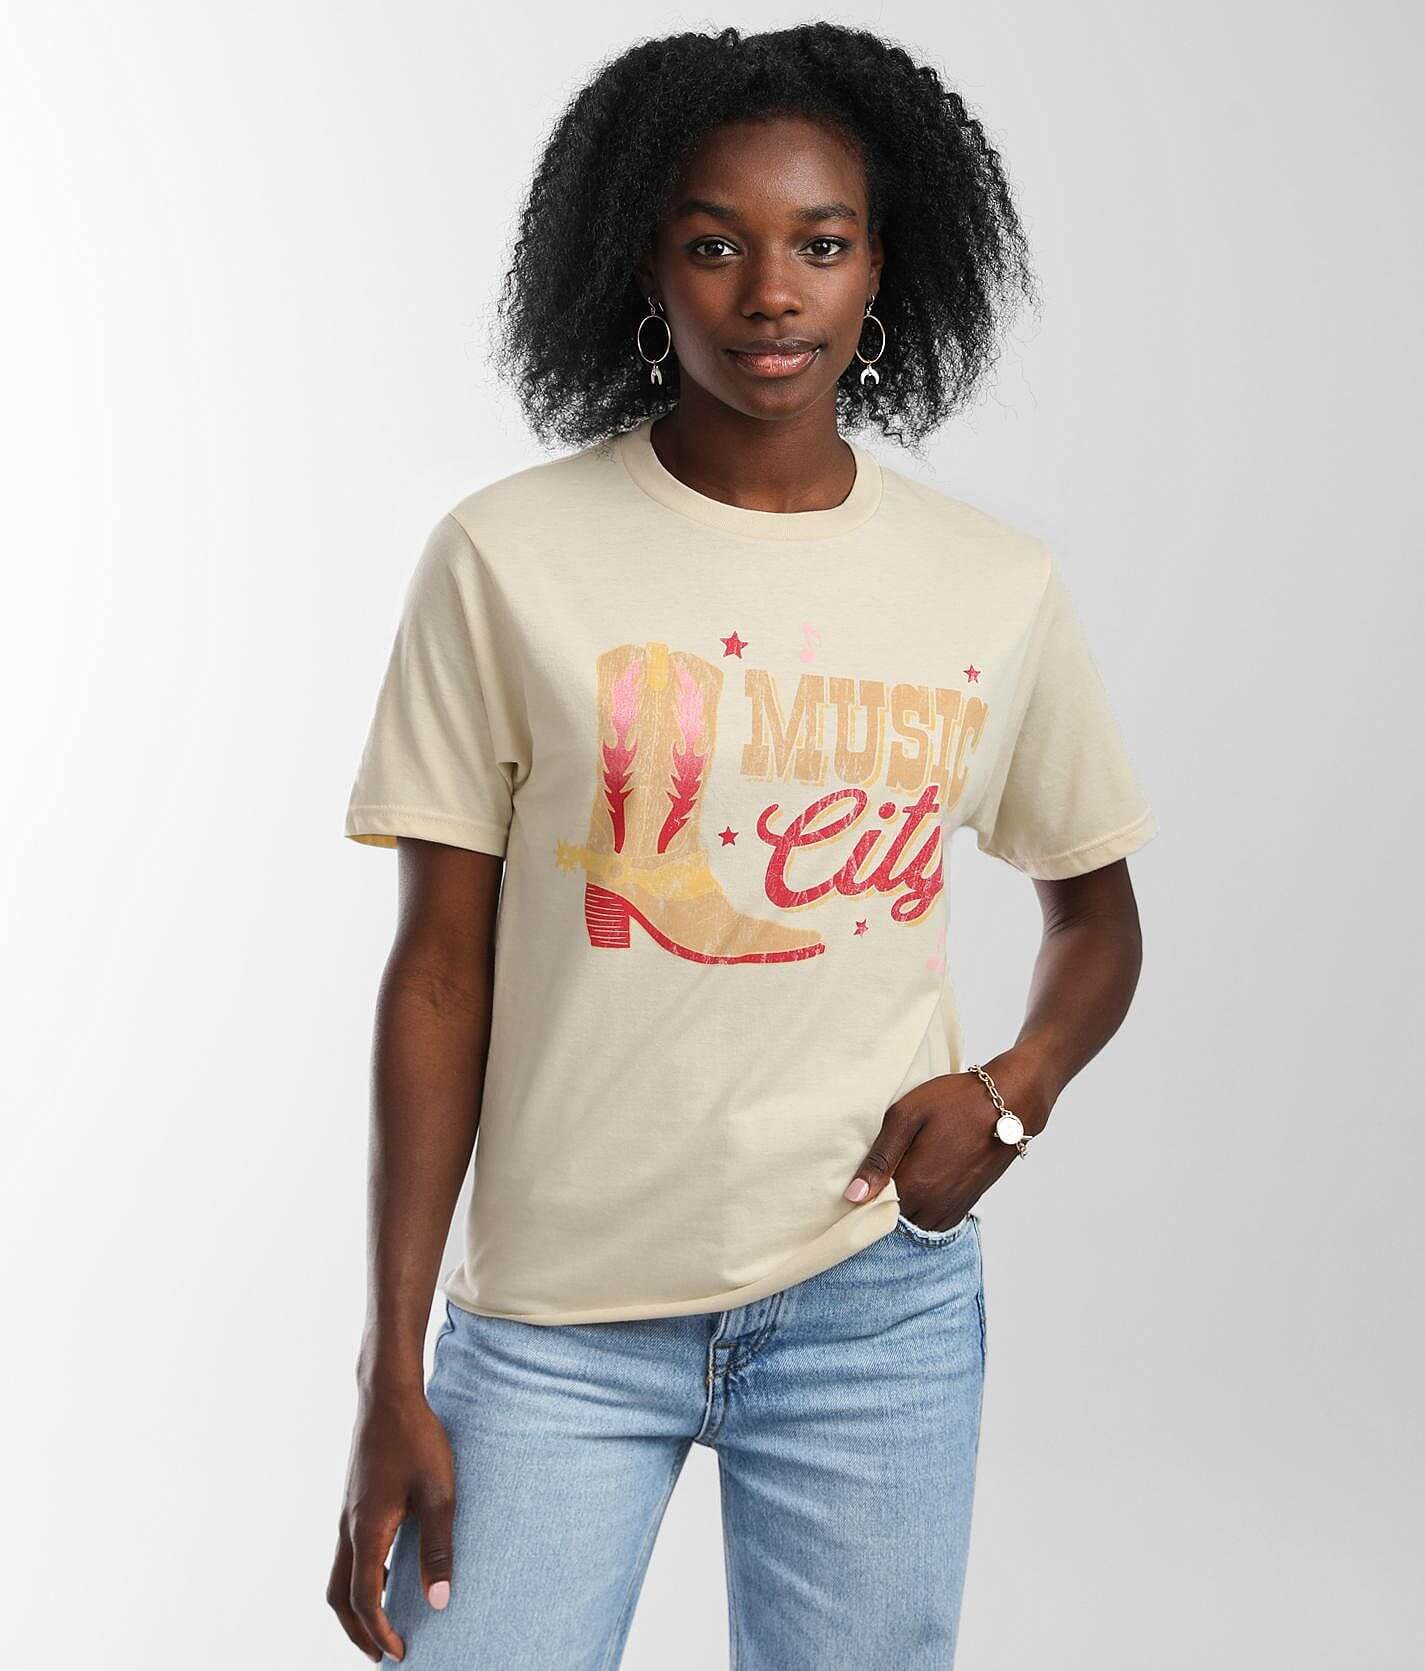 American Highway Music City T-Shirt  - Cream - female - Size: Extra Large